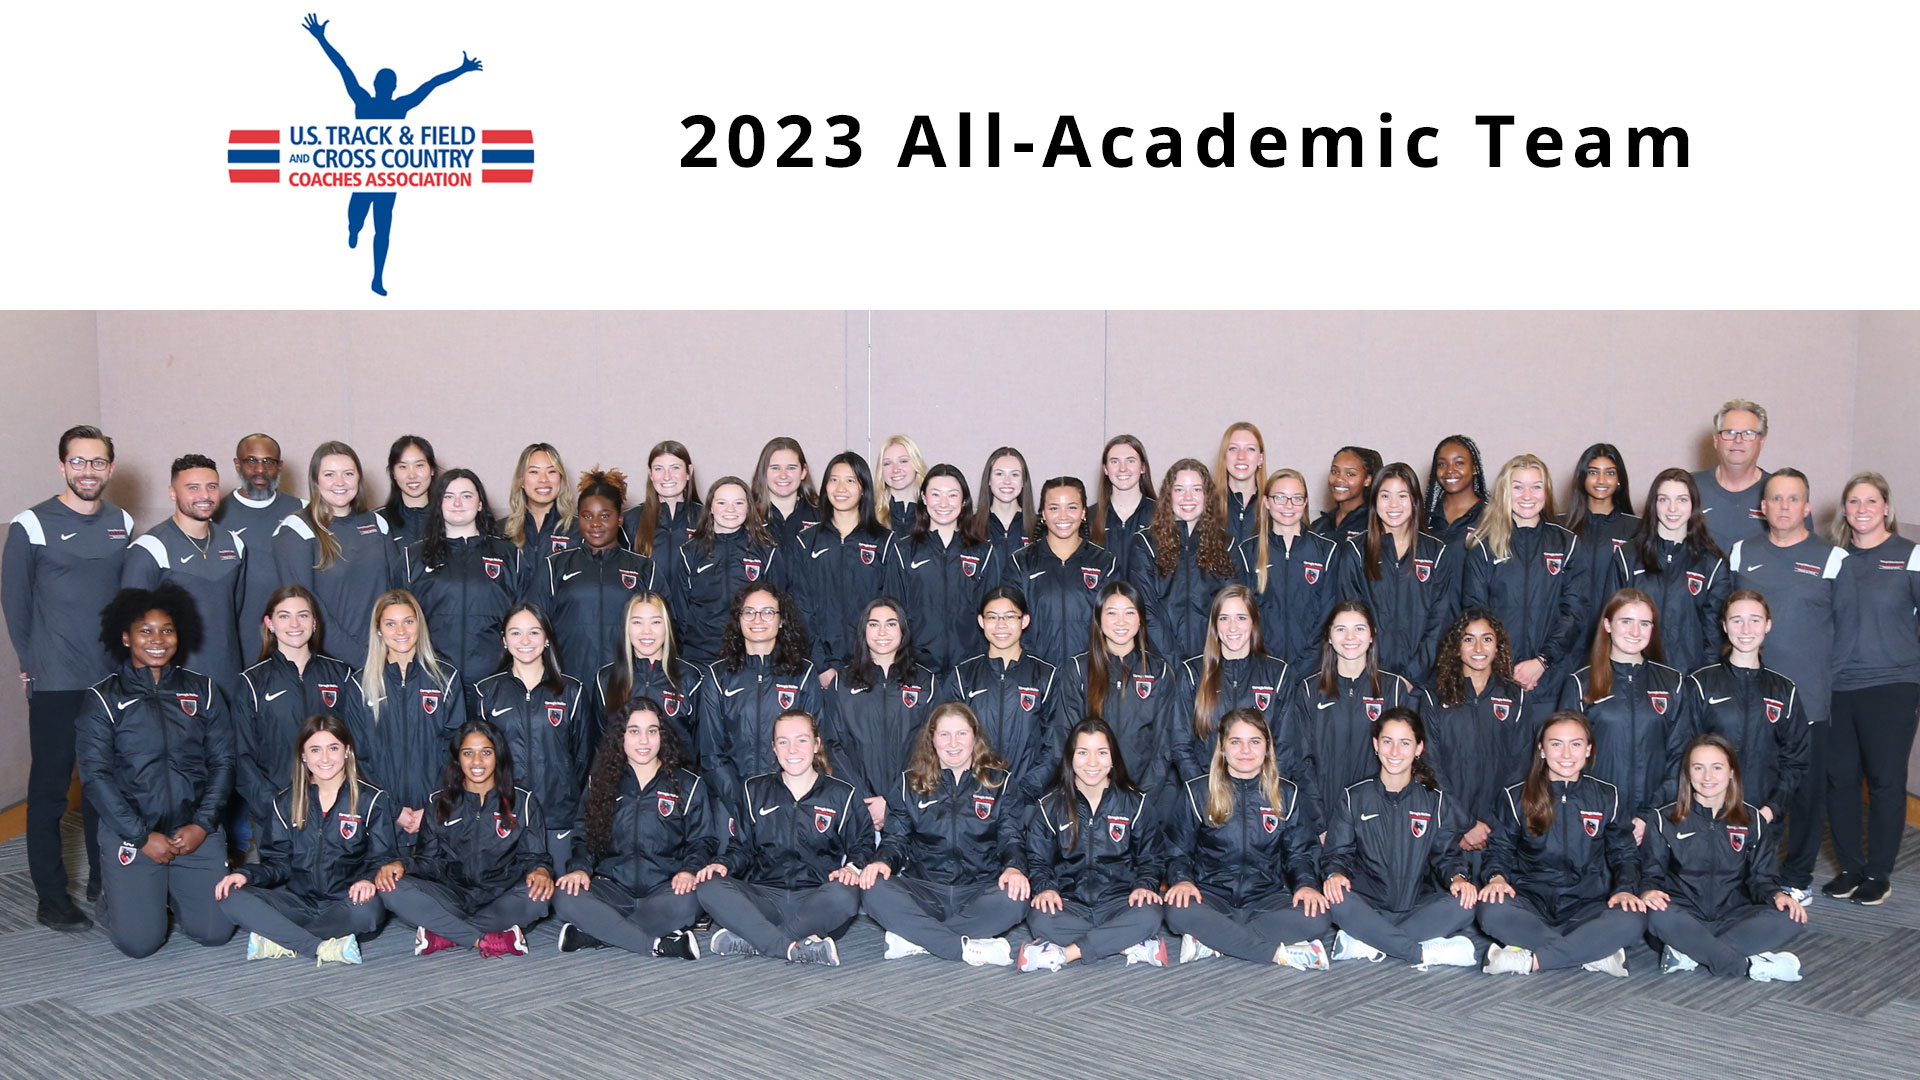 team photo of women's track and field team with USTFCCCA logo and text reading 2023 All-Academic Team